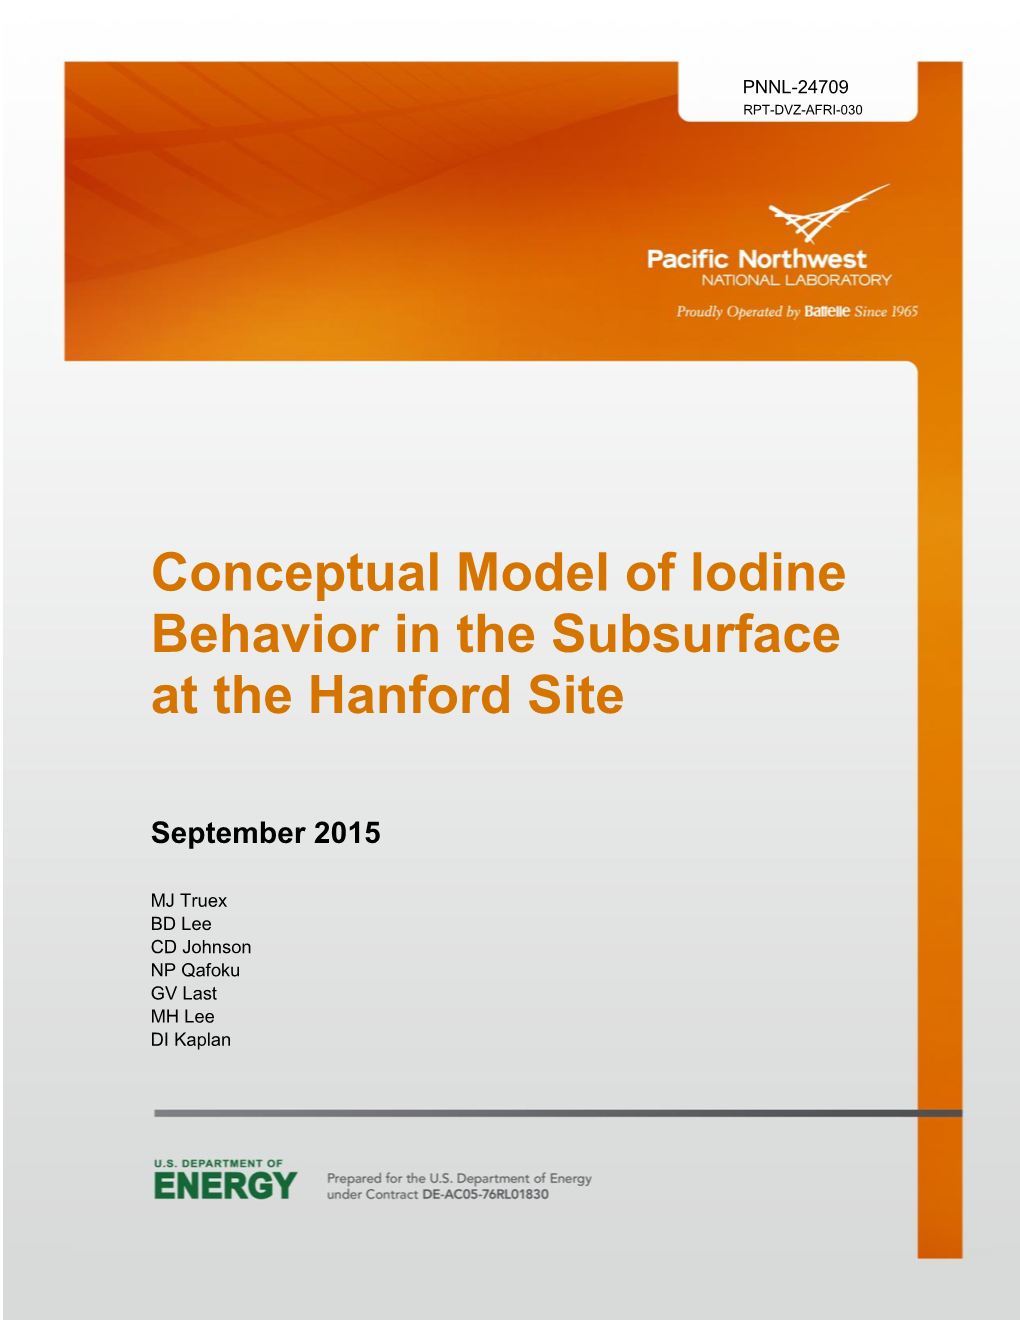 Conceptual Model of Iodine Behavior in the Subsurface at the Hanford Site